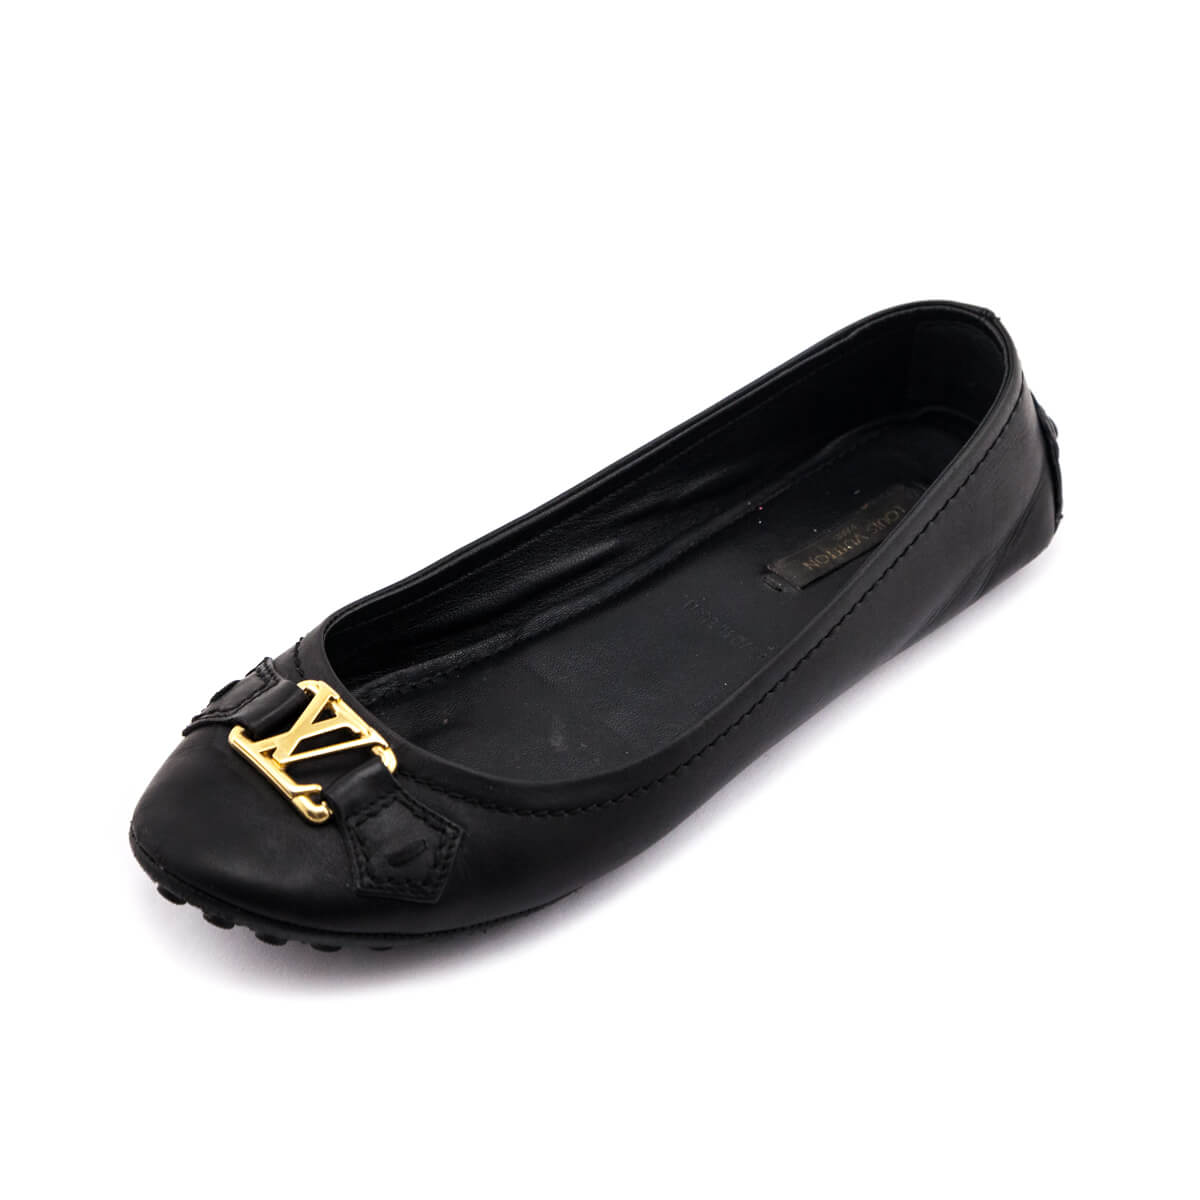 Voltaire leather flats Louis Vuitton Black size 7 UK in Leather - 35923544